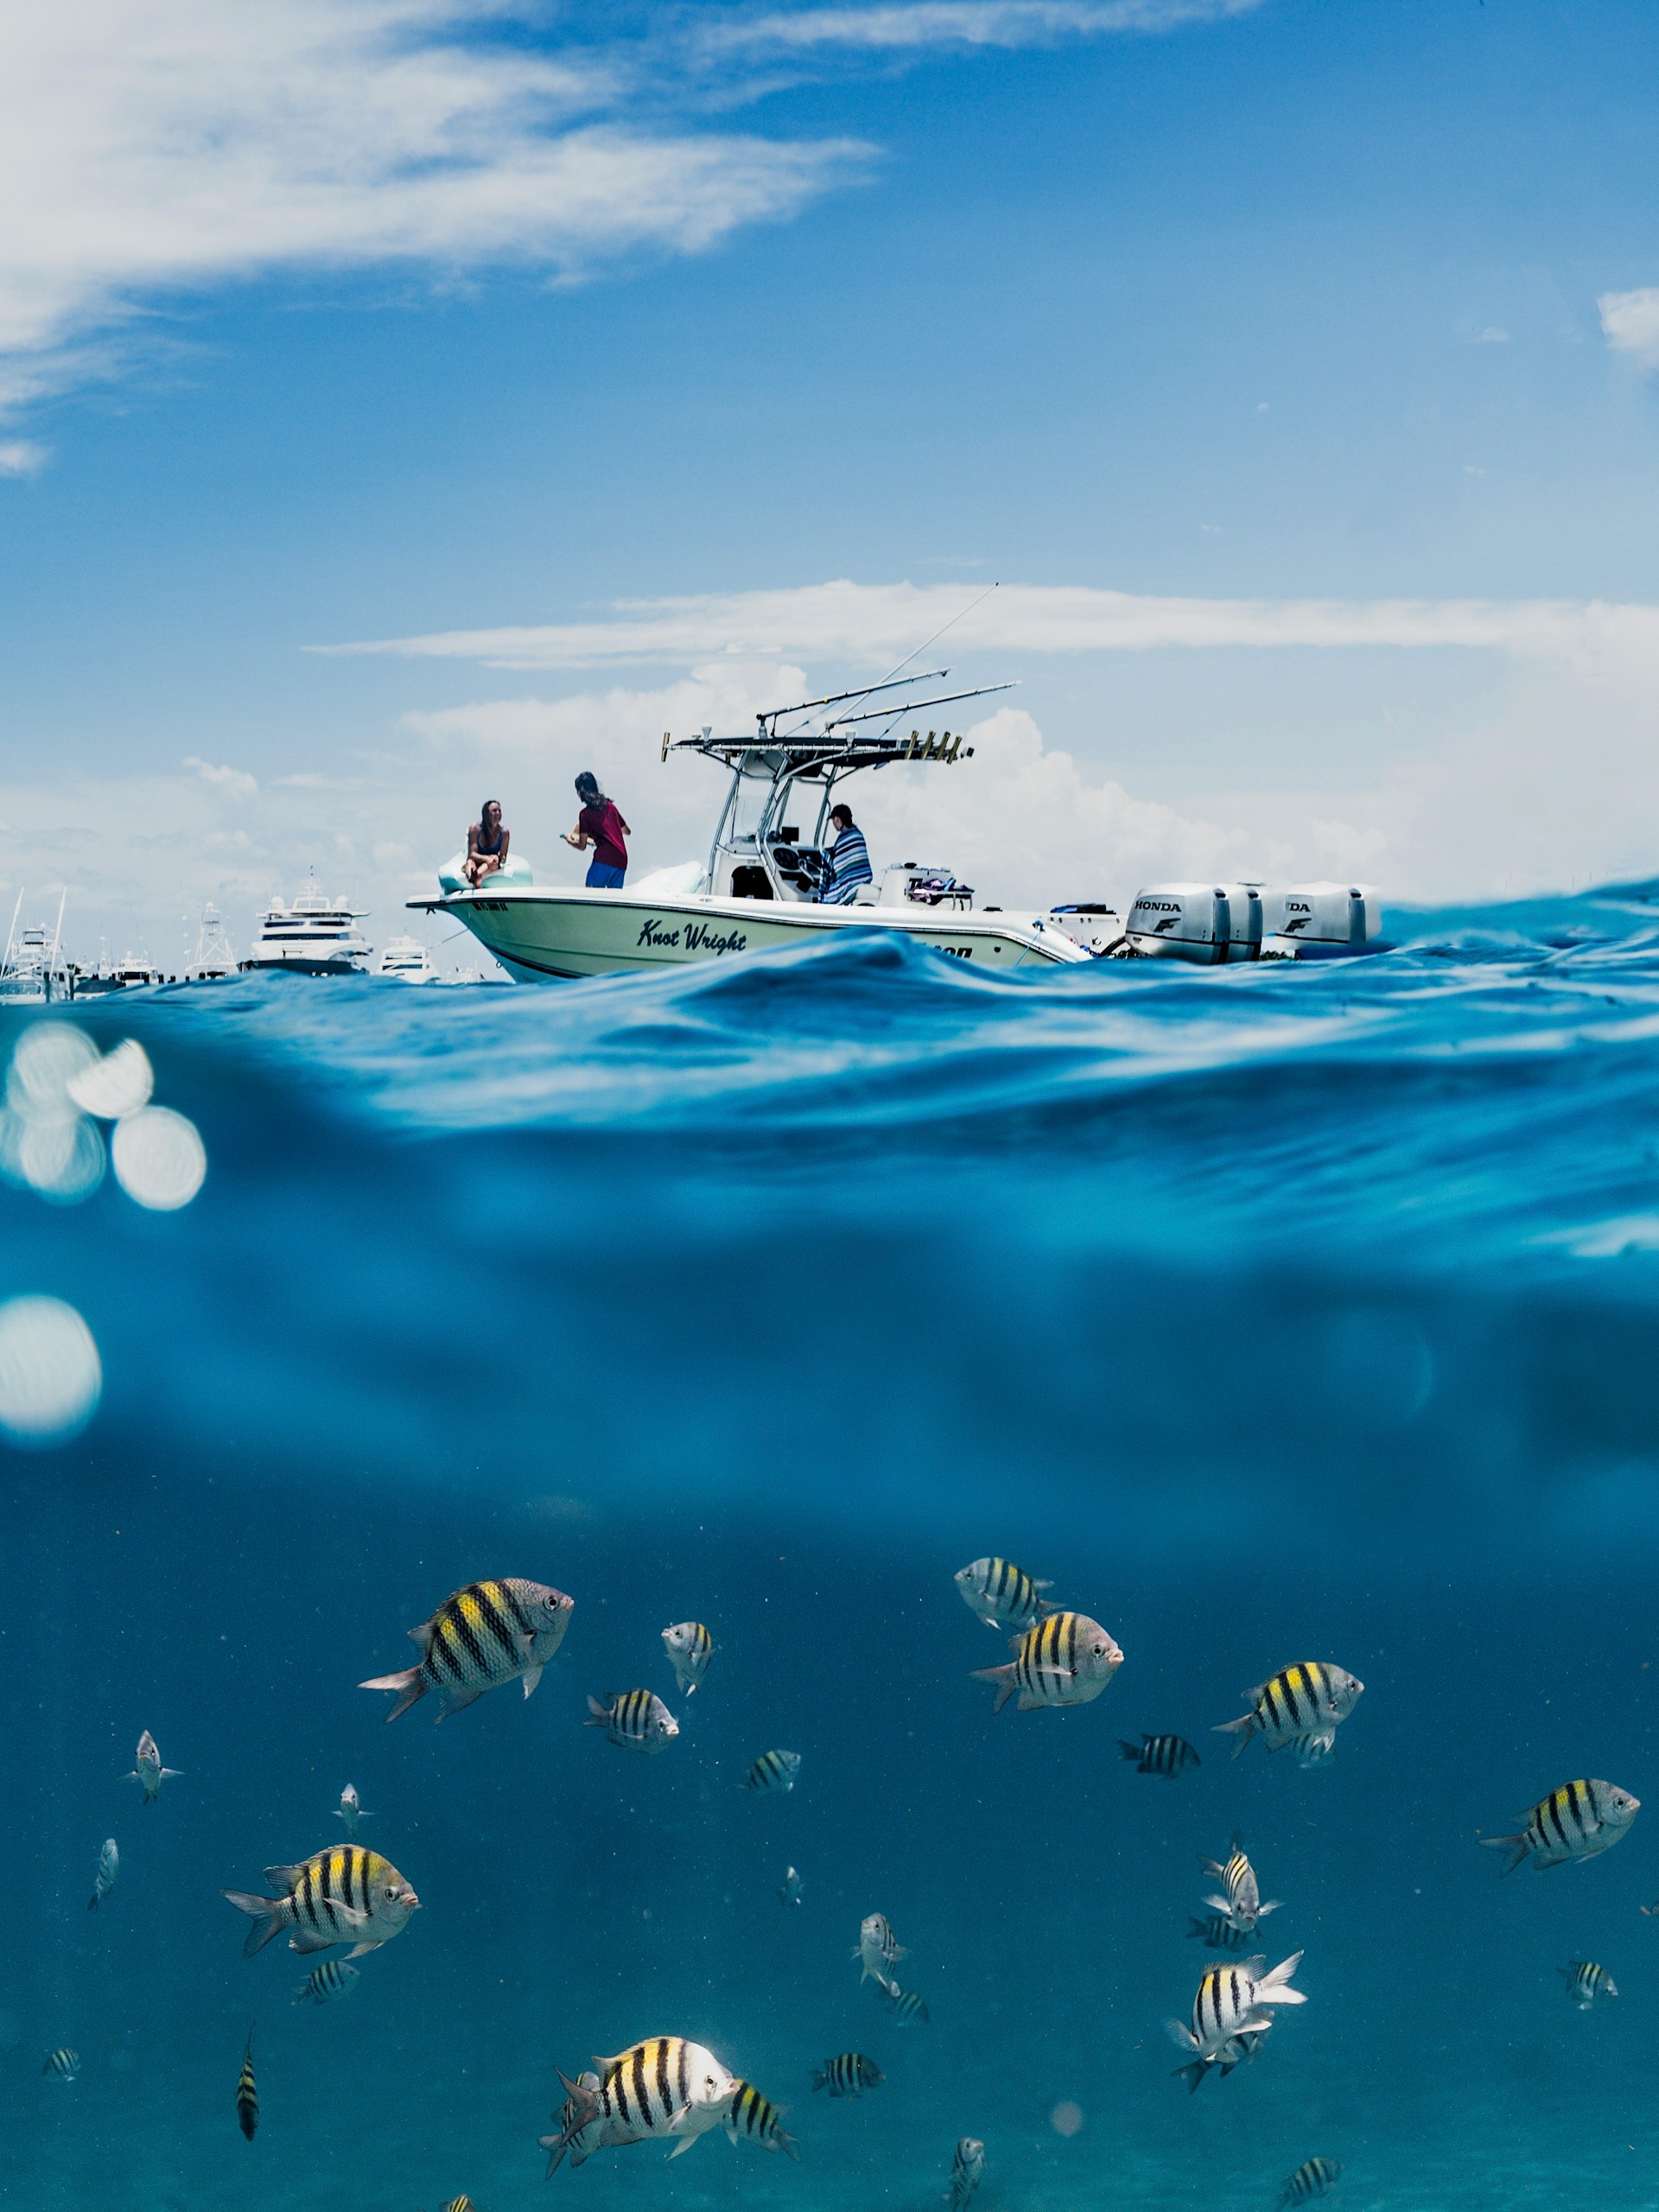 Boats and tropical fish off the coast of Jupiter, FL (photo: Chase Baker)